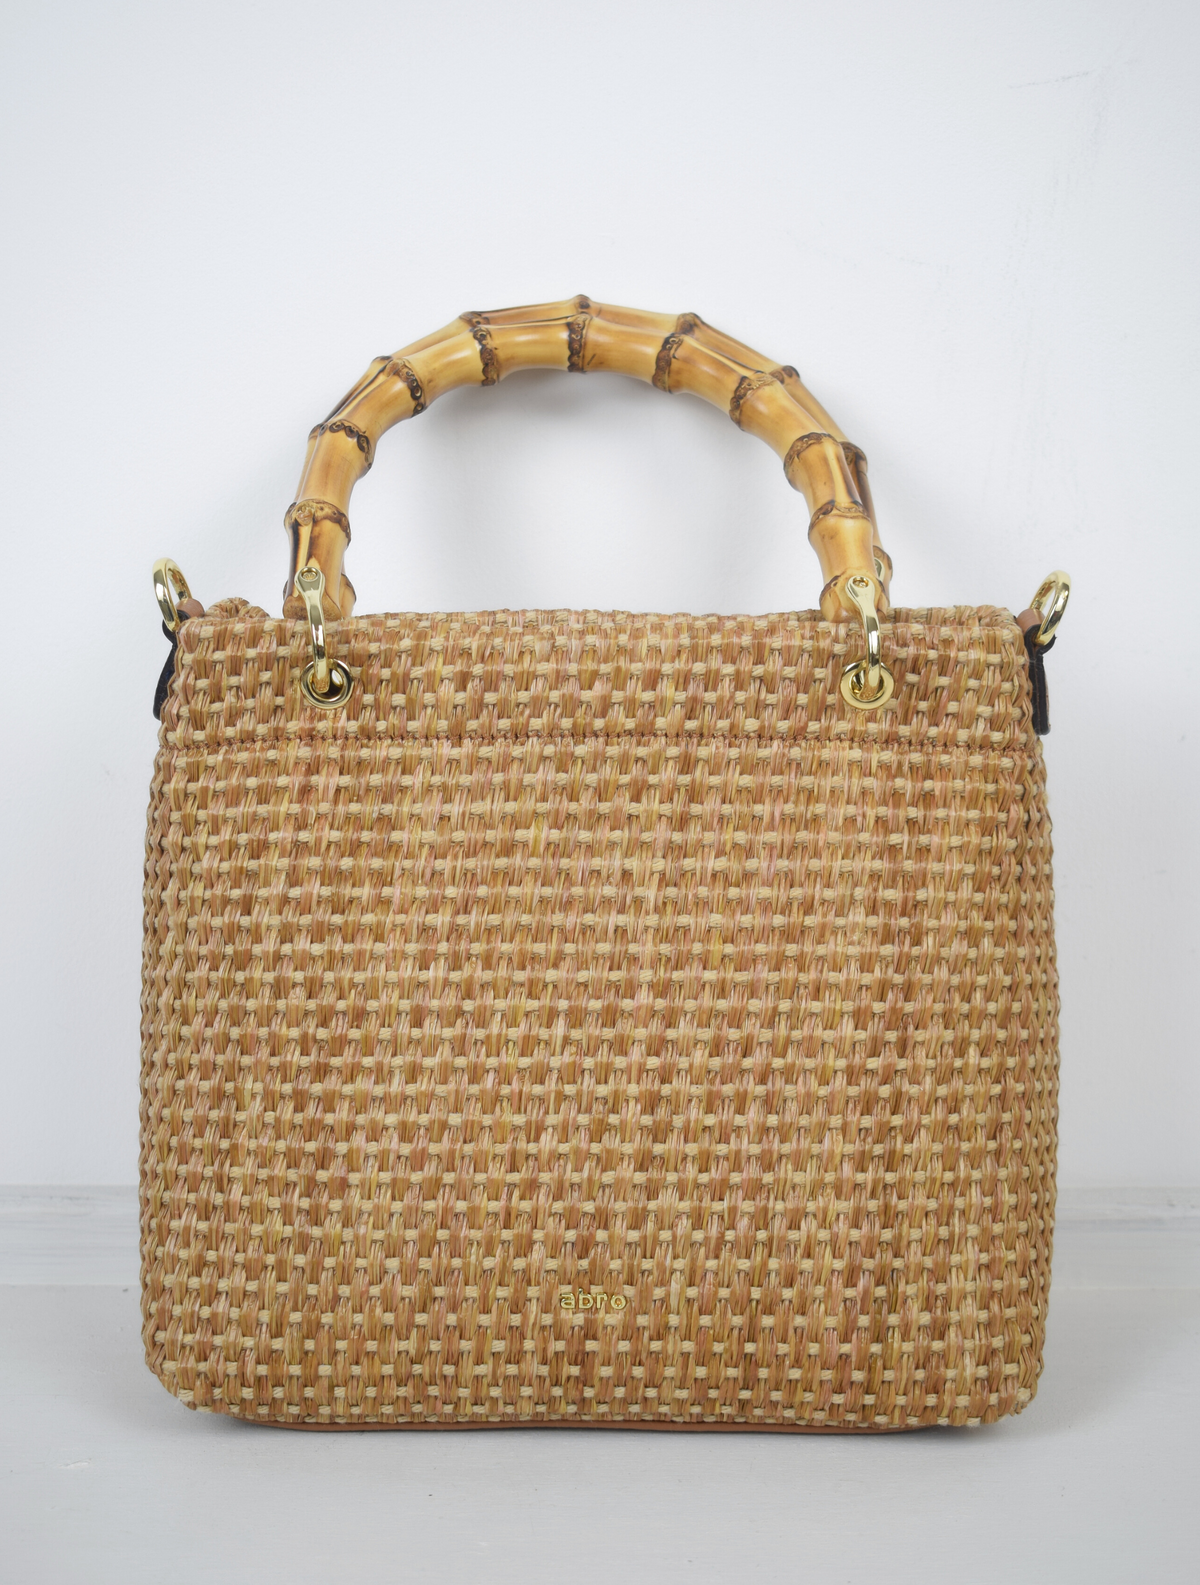 raffia bag with bamboo handle and longer nude cross body strap